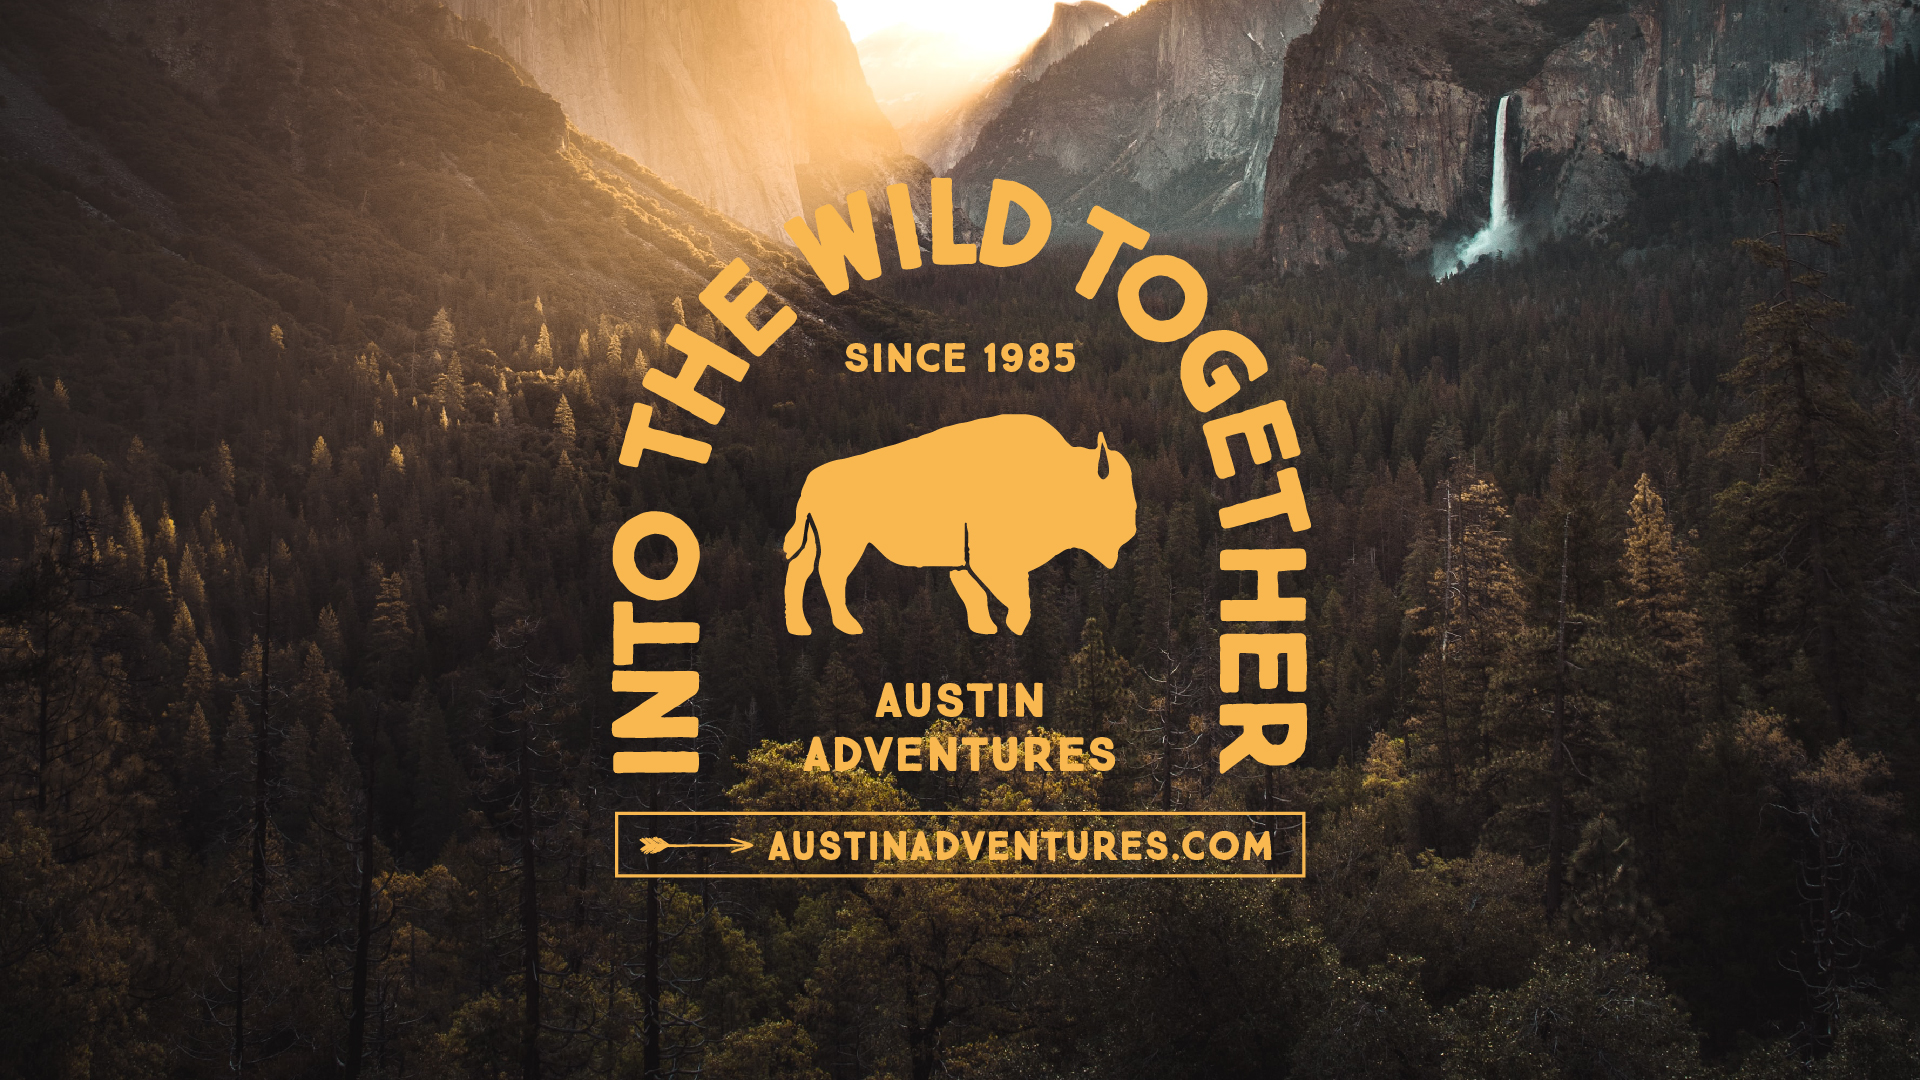 Into the Wild Together. Austin Adventures.